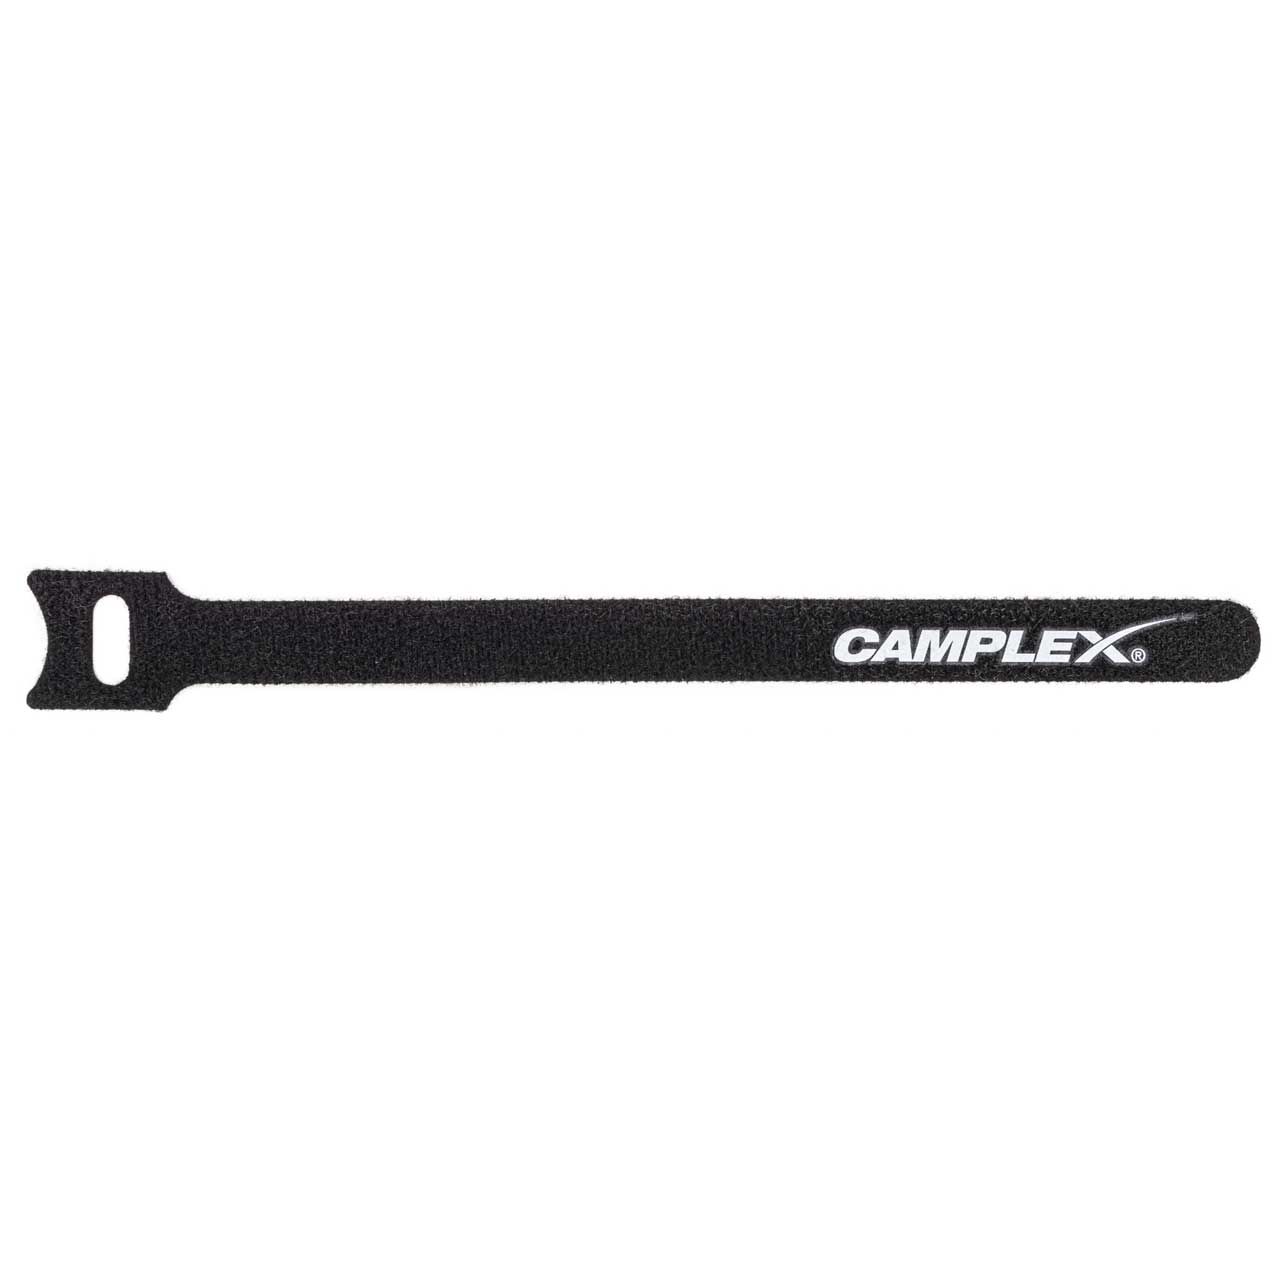 Camplex Hook and Loop Cable Wrap 12mm x 180mm Black with White Logo - 25 Pack CMX-HKNLP-25PK